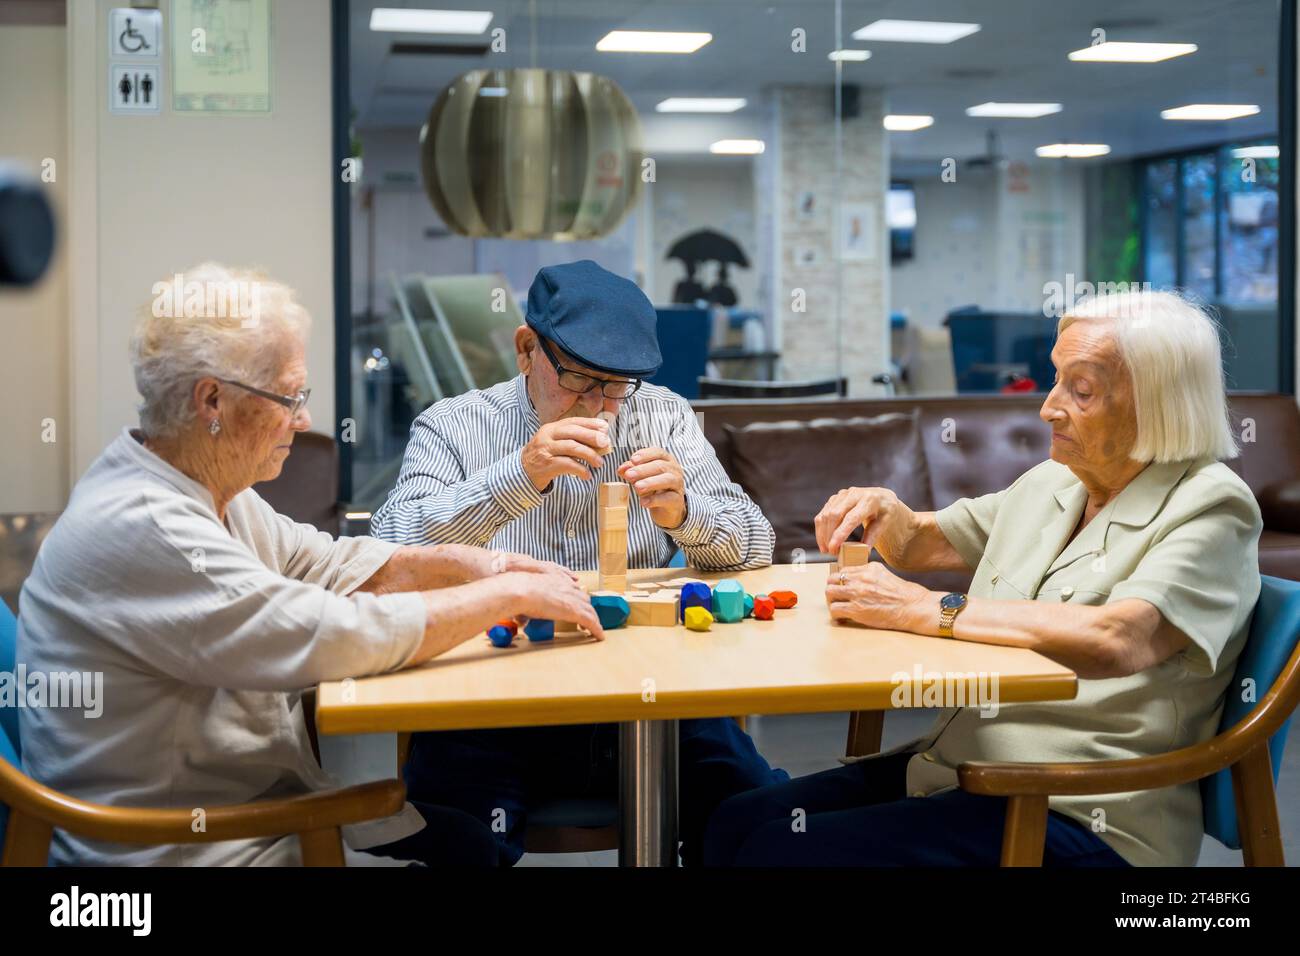 Elderly residents in a nursing home engaging in motor skills games with pieces Stock Photo